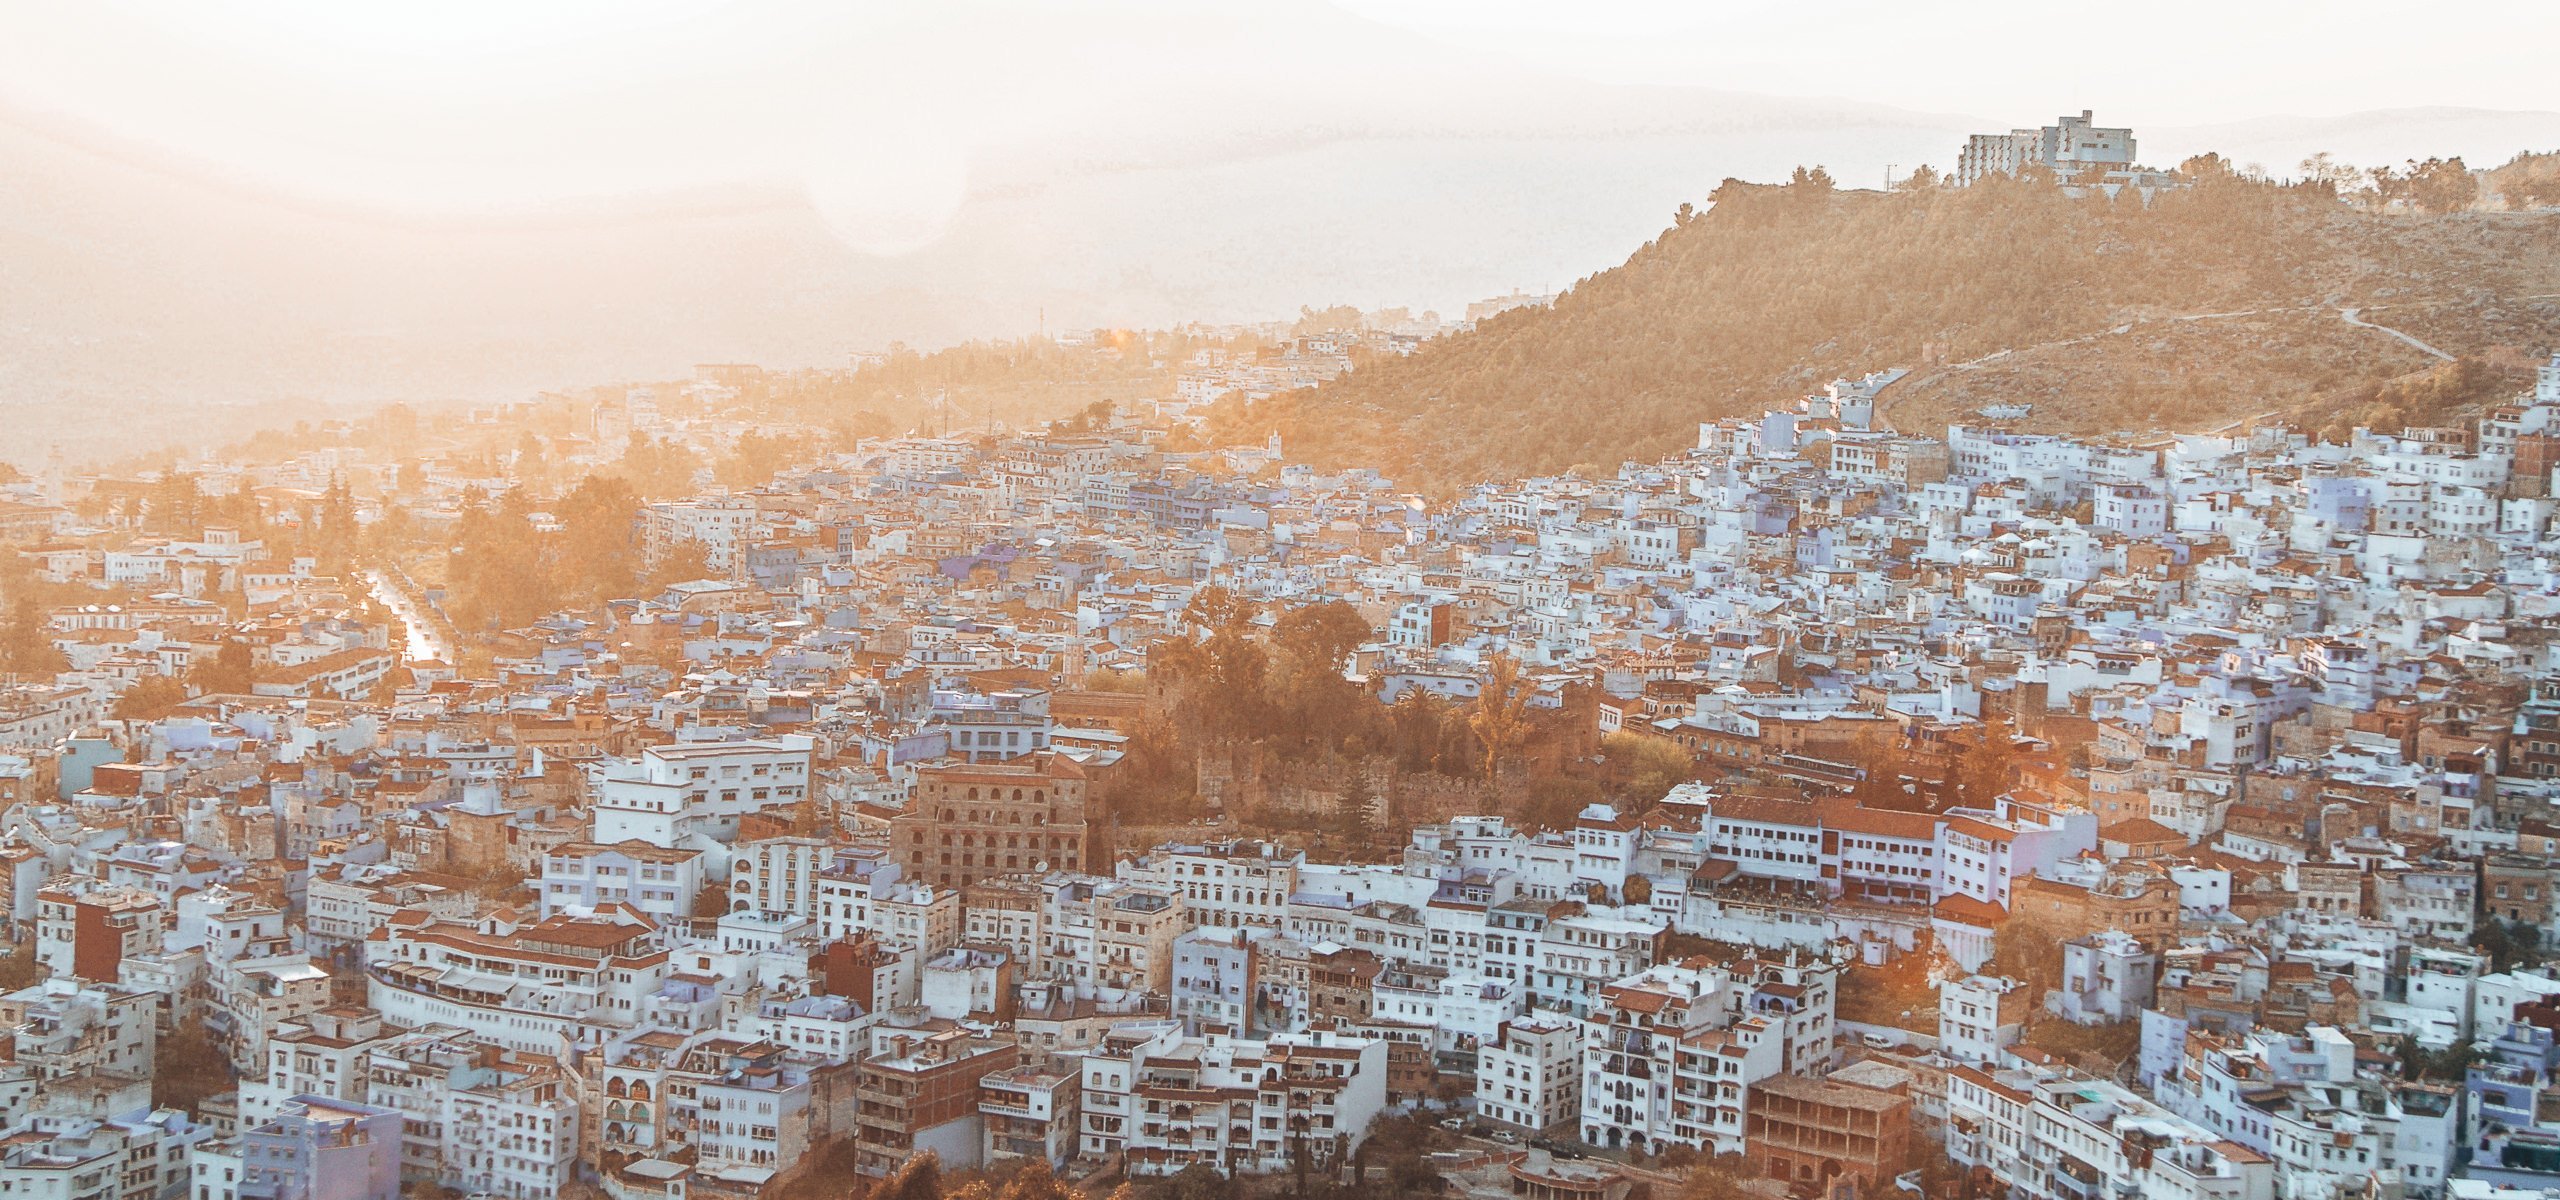 How many days in Chefchaouen | The sun sets over Chefchaouen, lighting up the blue city with a soft golden glow, Chefchaouen